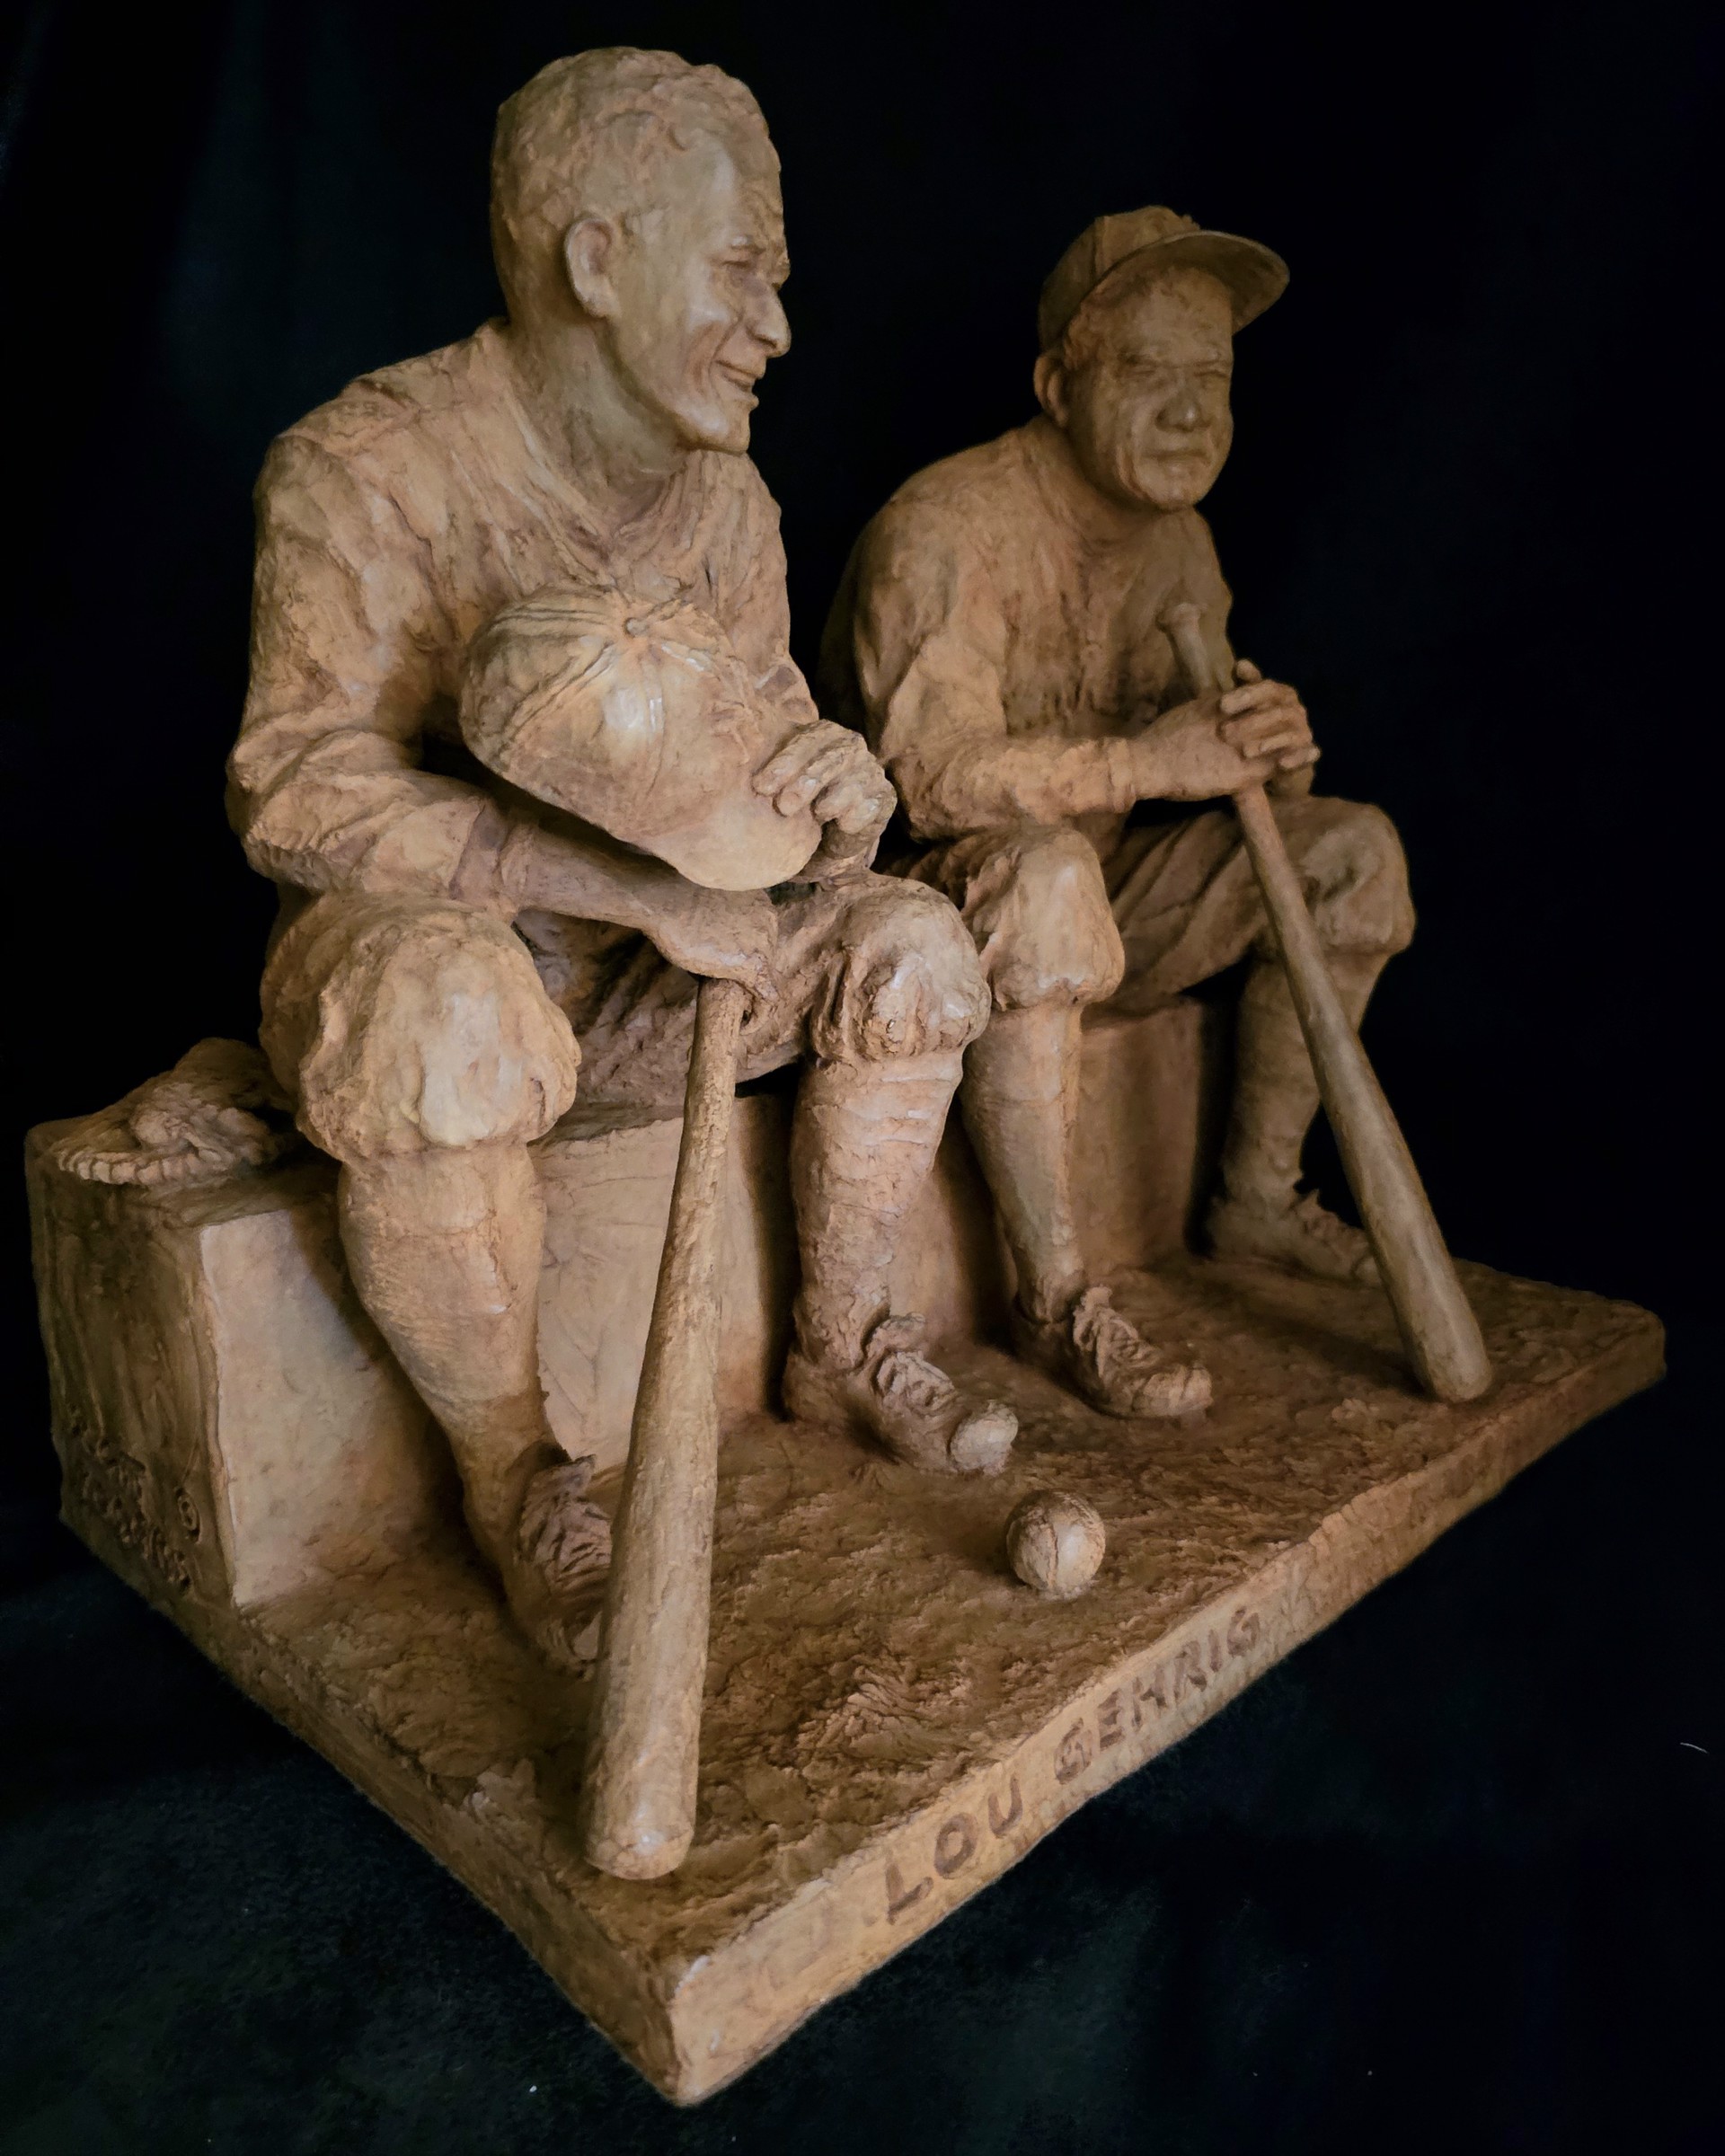 Babe & Lou (Maquette Size) (Edition of 30) by Scott Rogers